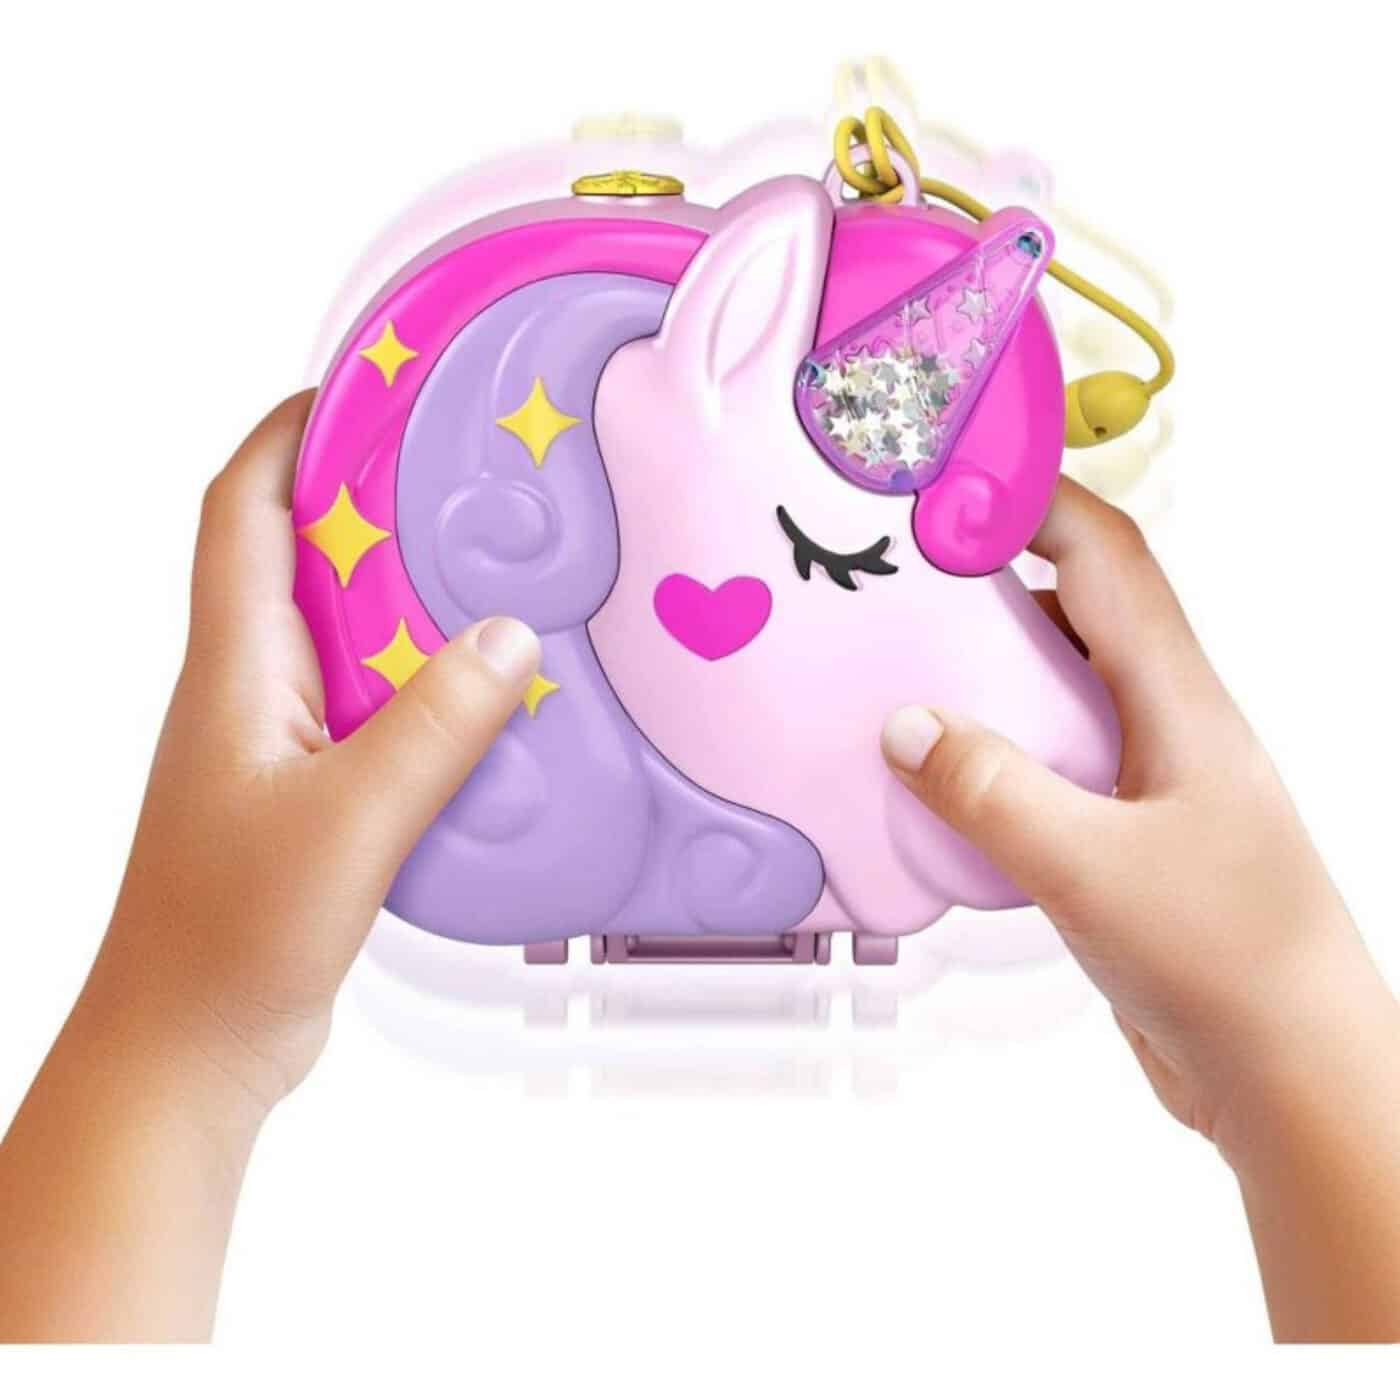 Polly Pocket - Unicorn Forest Compact Playset